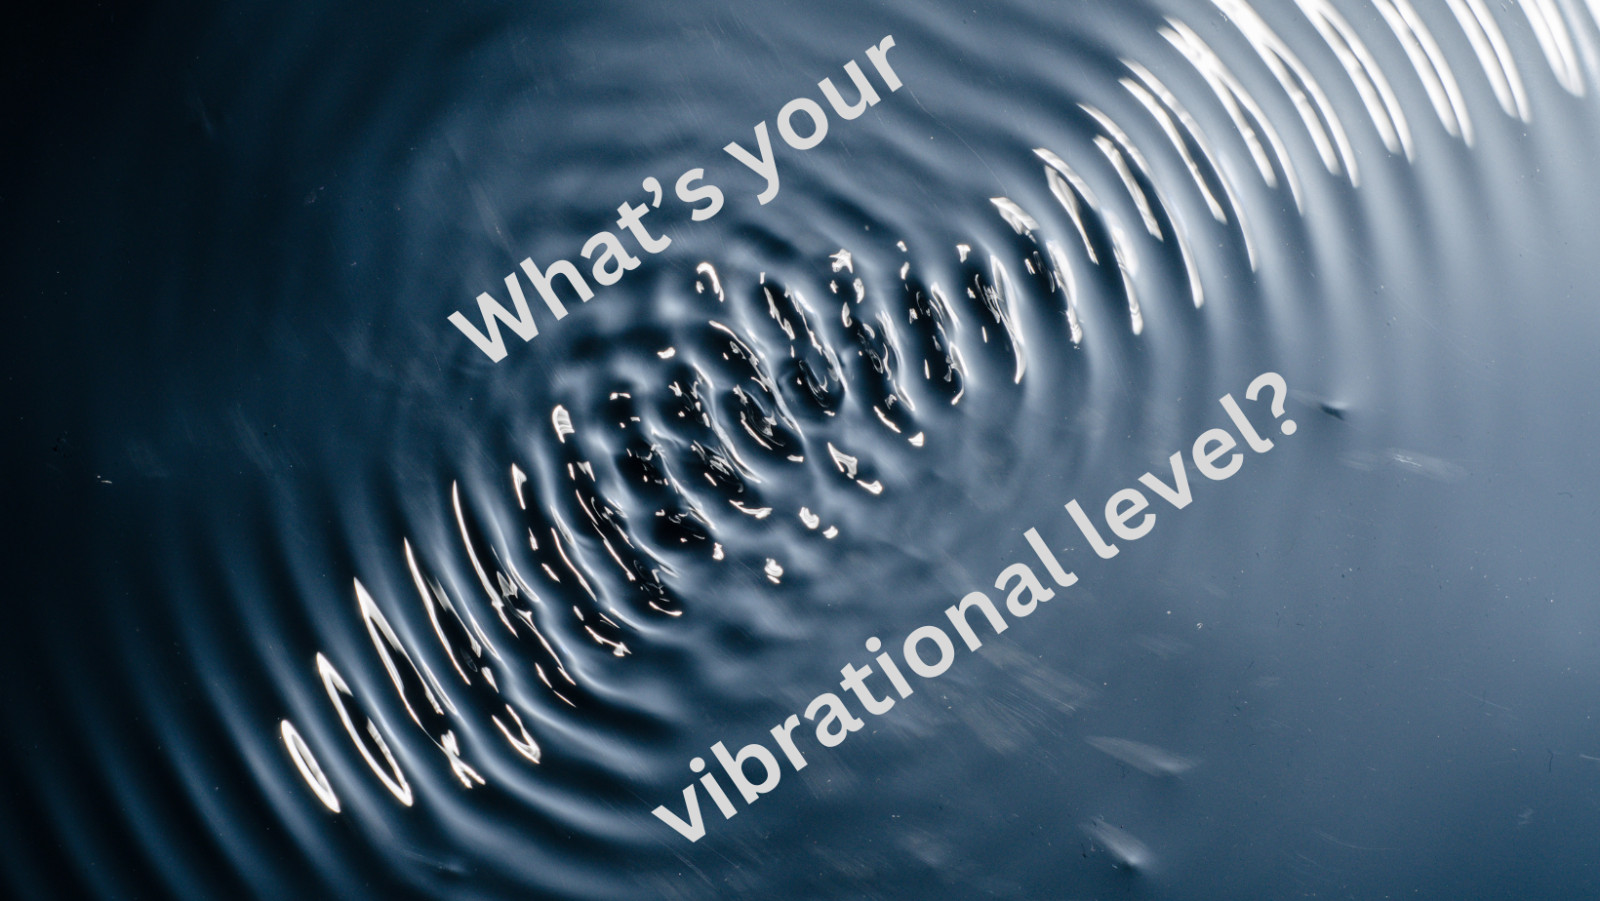 What level of vibration are you at?